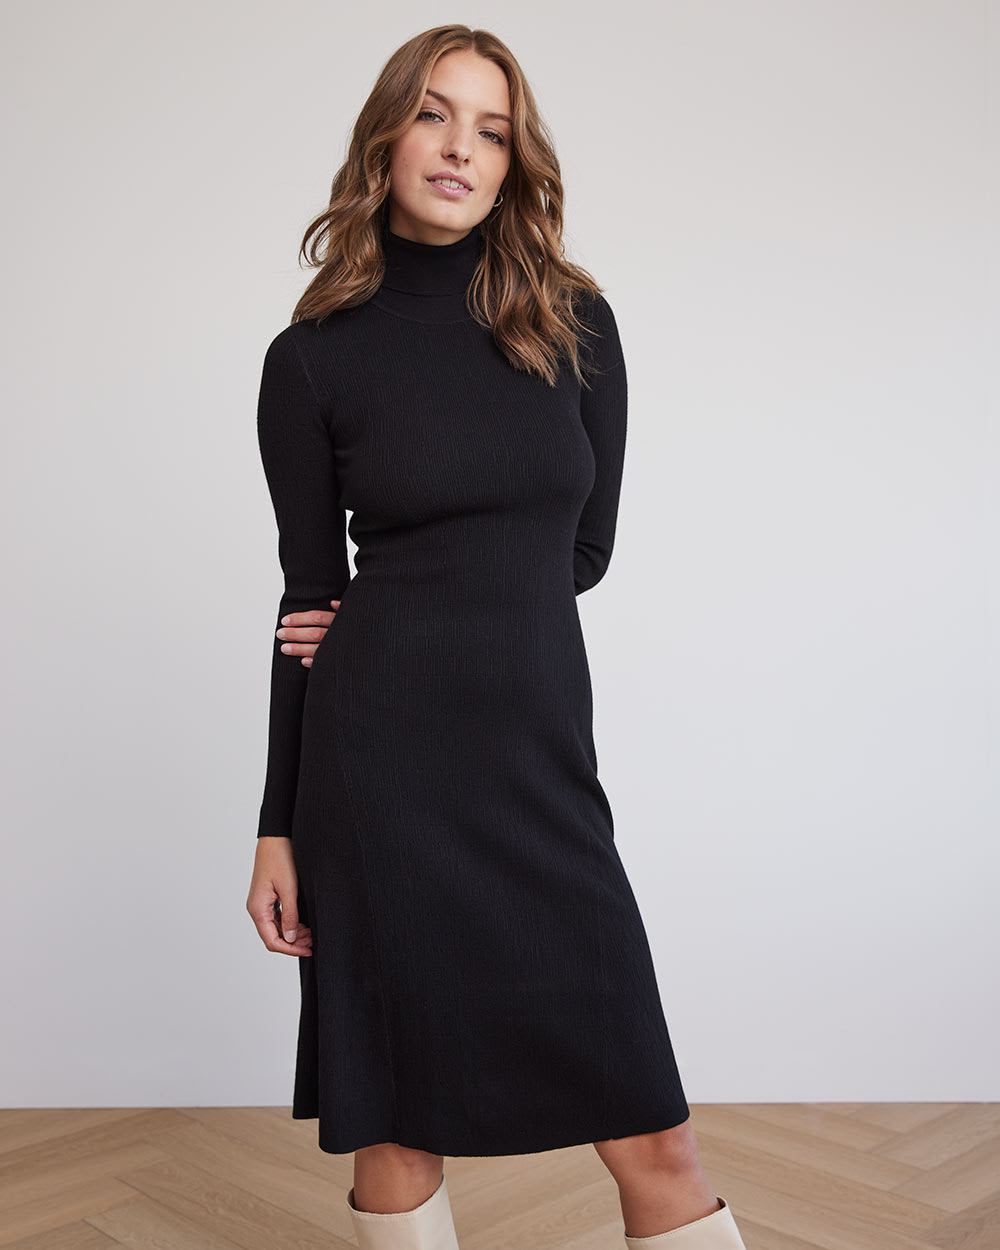 Black Cami Dress with Turtleneck Outfits (3 ideas & outfits